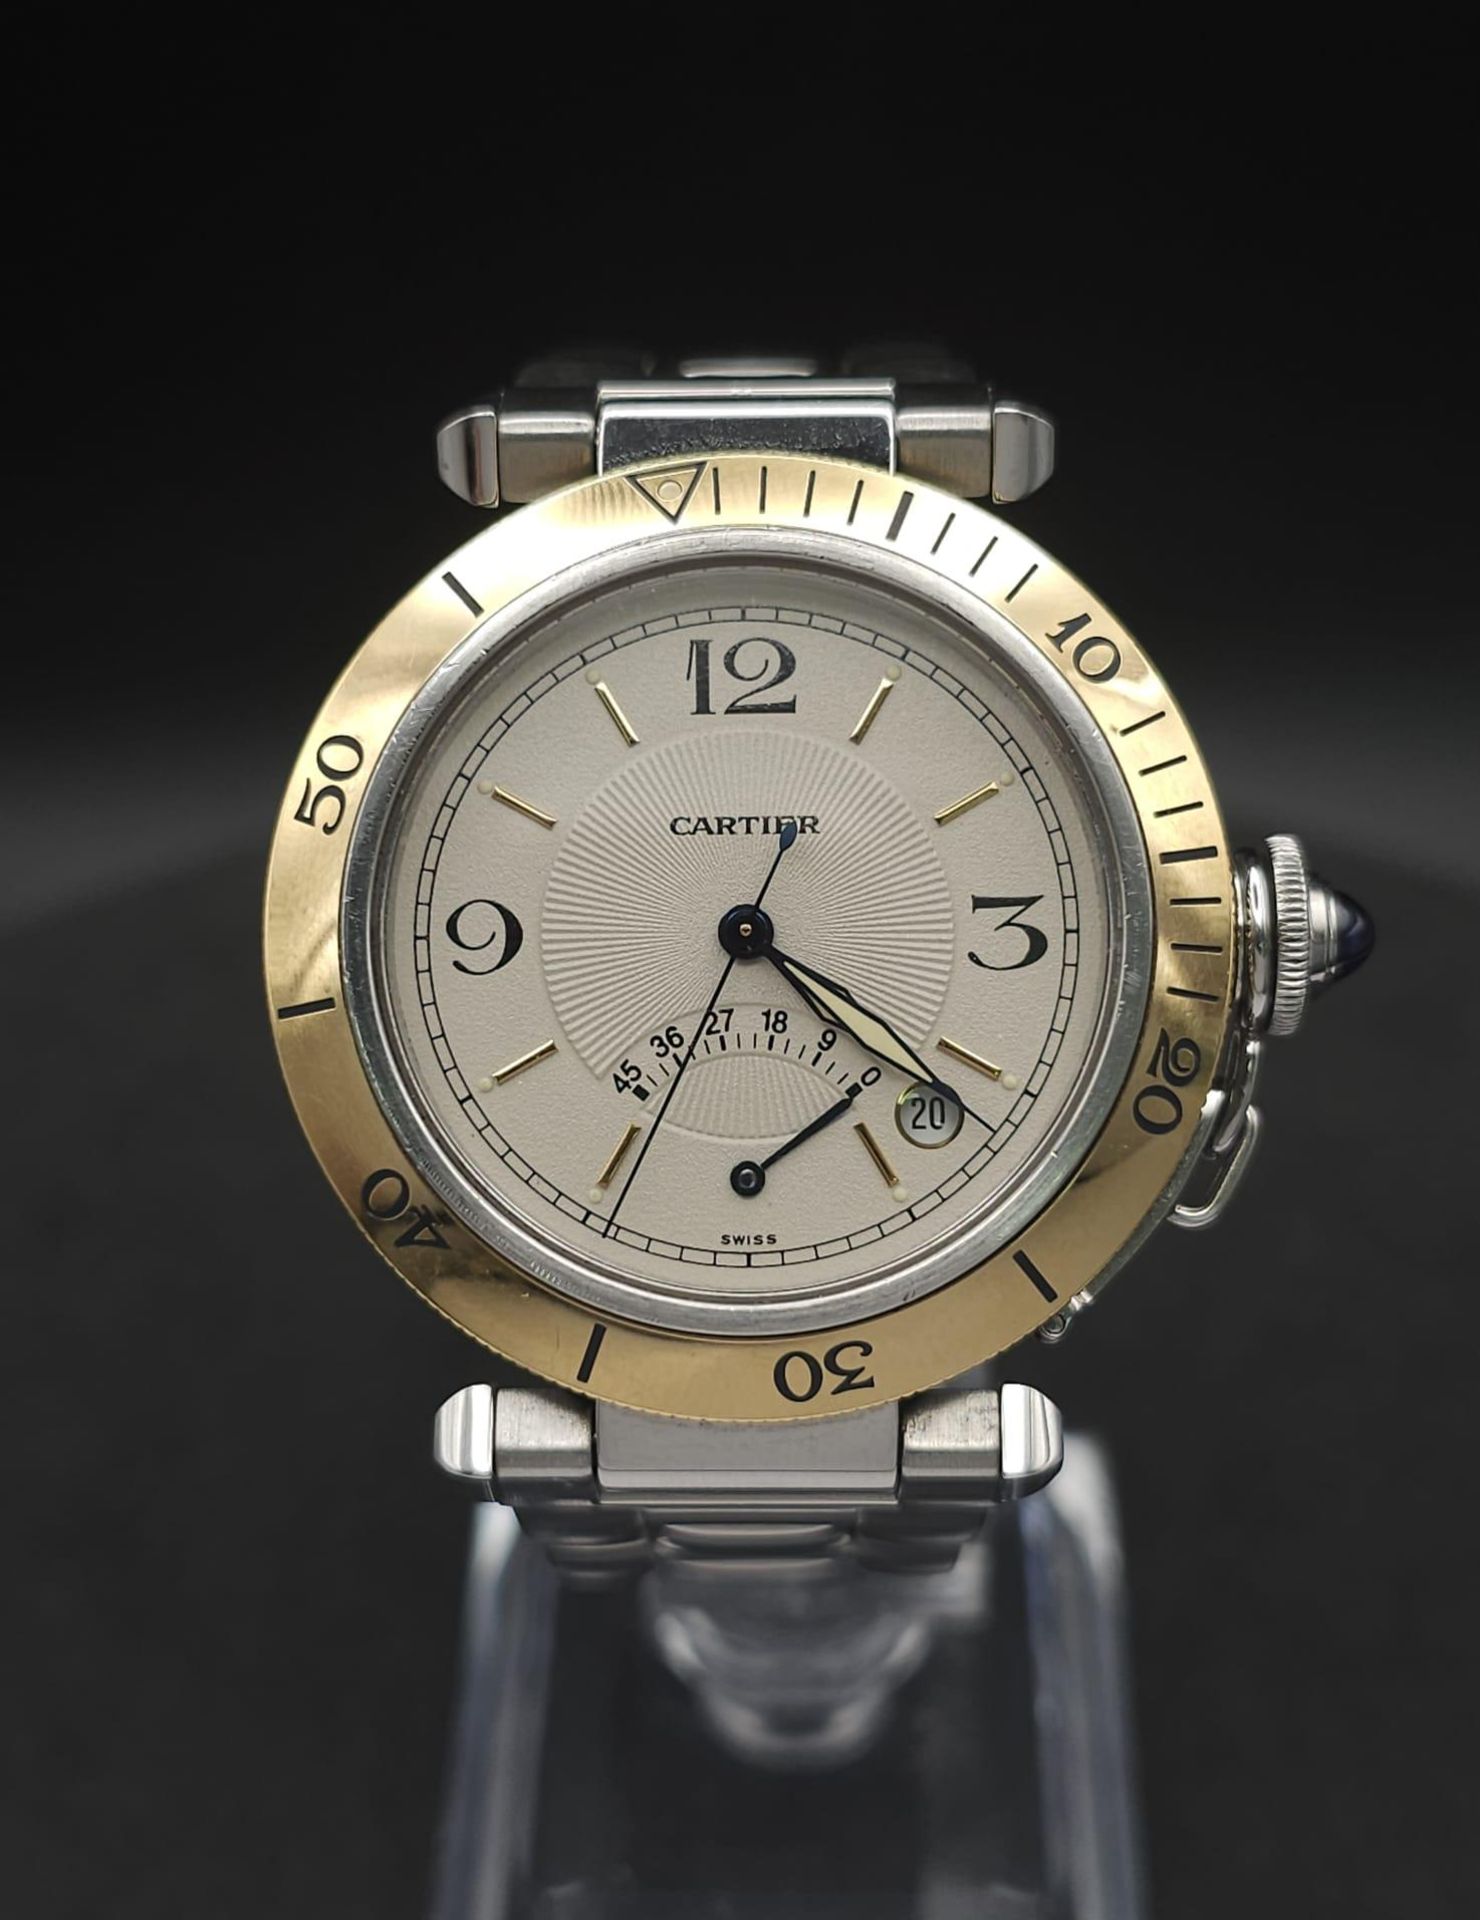 A Cartier de Pasha Automatic Gents Watch. Stainless steel bracelet and case - 38mm. Cream dial